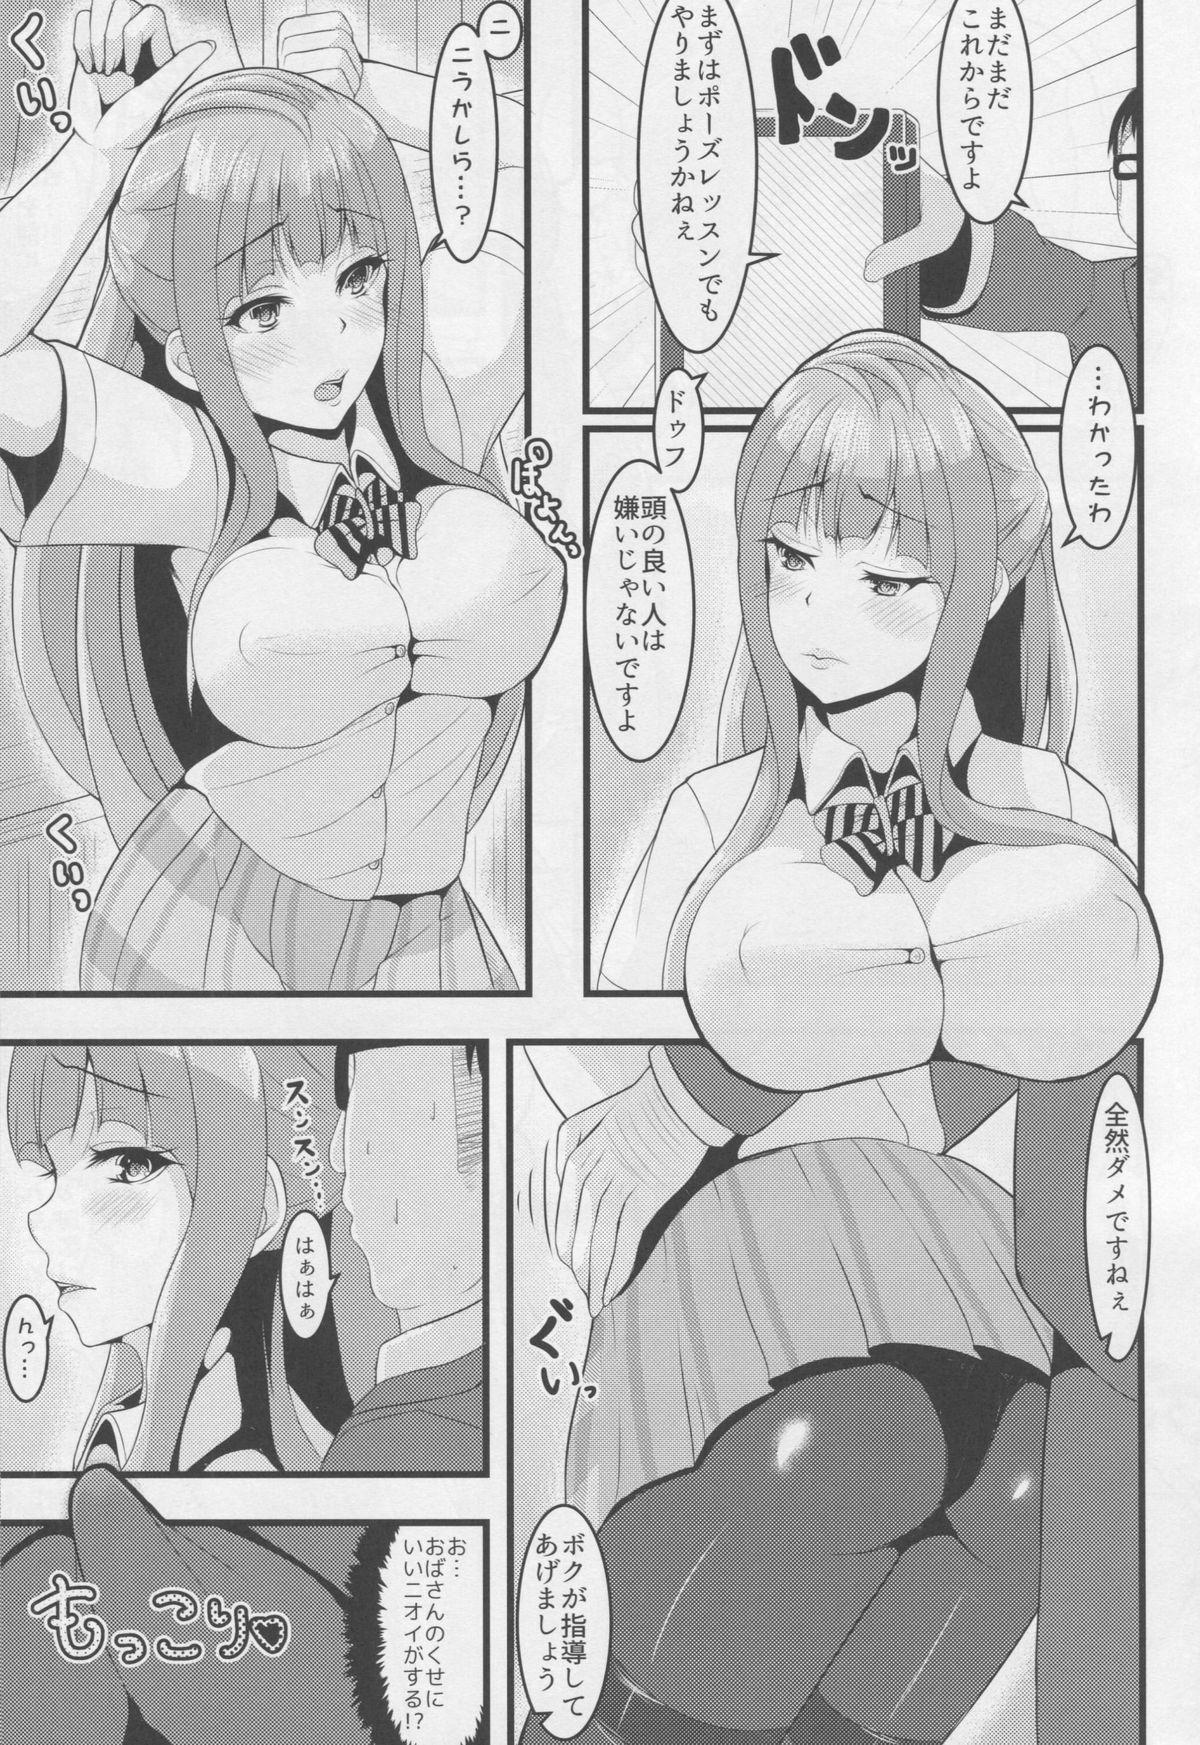 Assfucked After school Mama Raper - Love live Bang - Page 6